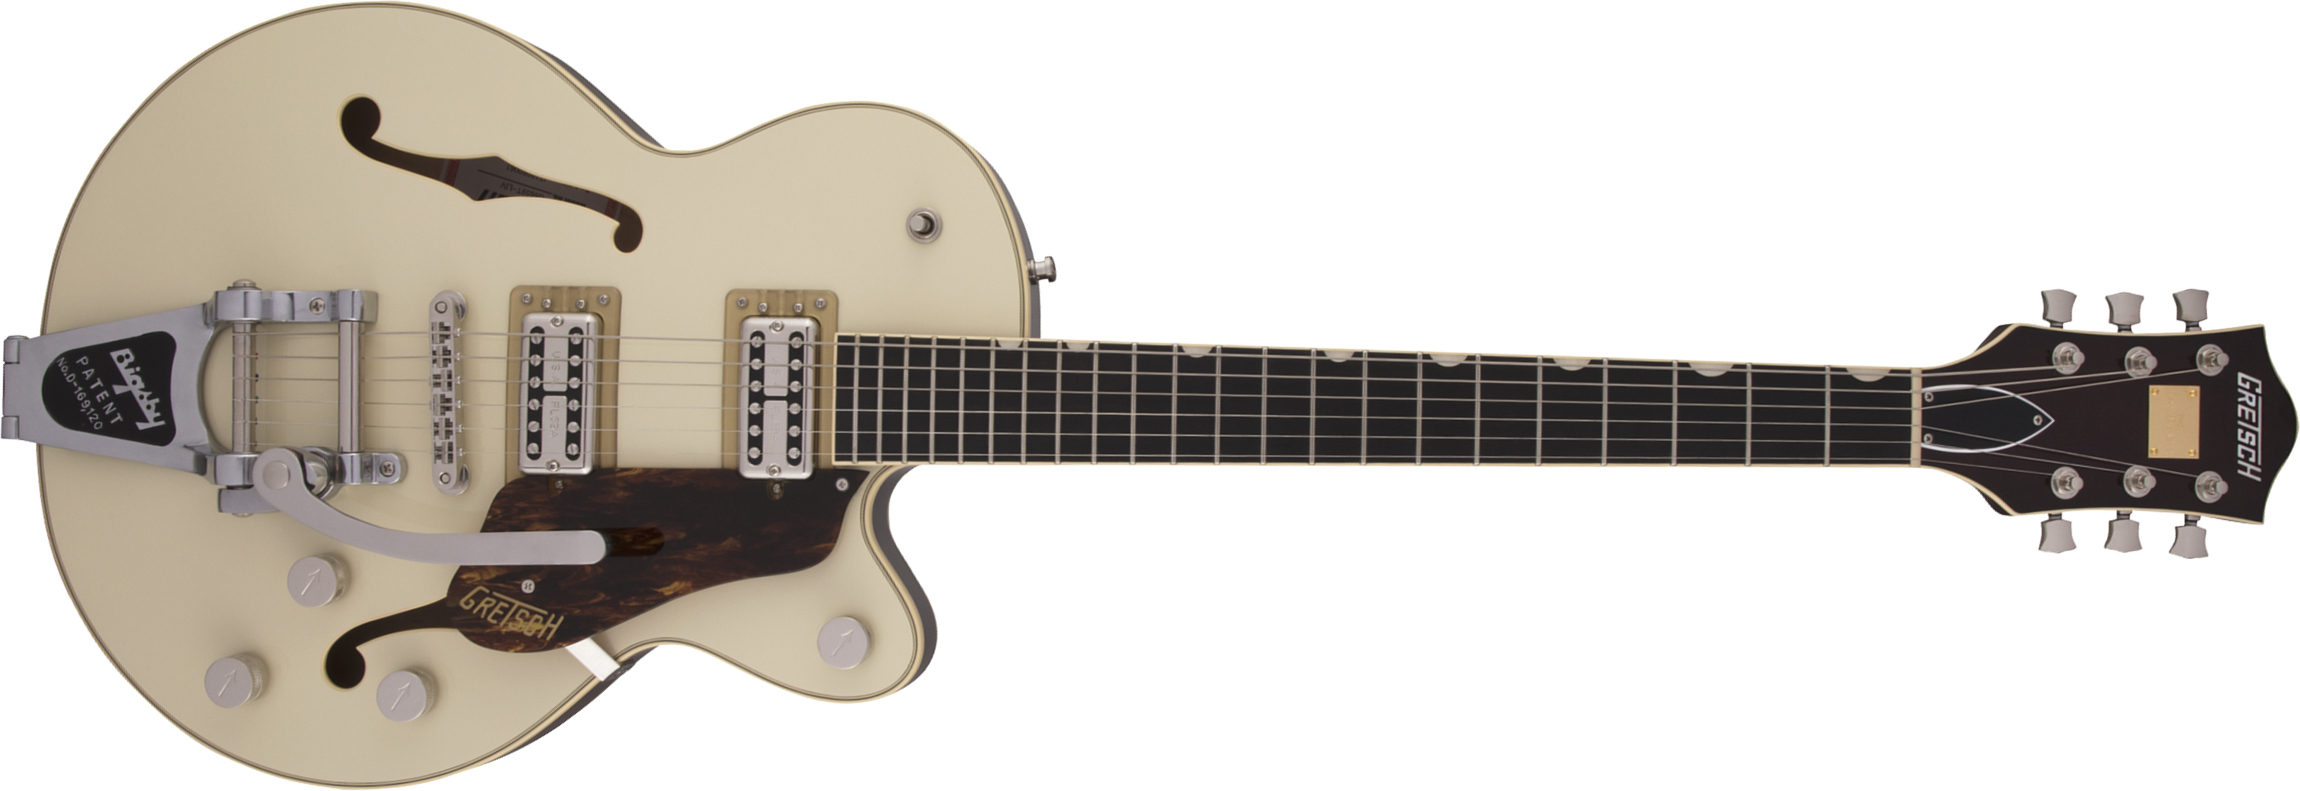 Gretsch G6659t Broadkaster Jr Center Bloc Players Edition Nashville Pro Japon Bigsby Eb - Two-tone Lotus Ivory/walnut Stain - Semi-hollow electric gui